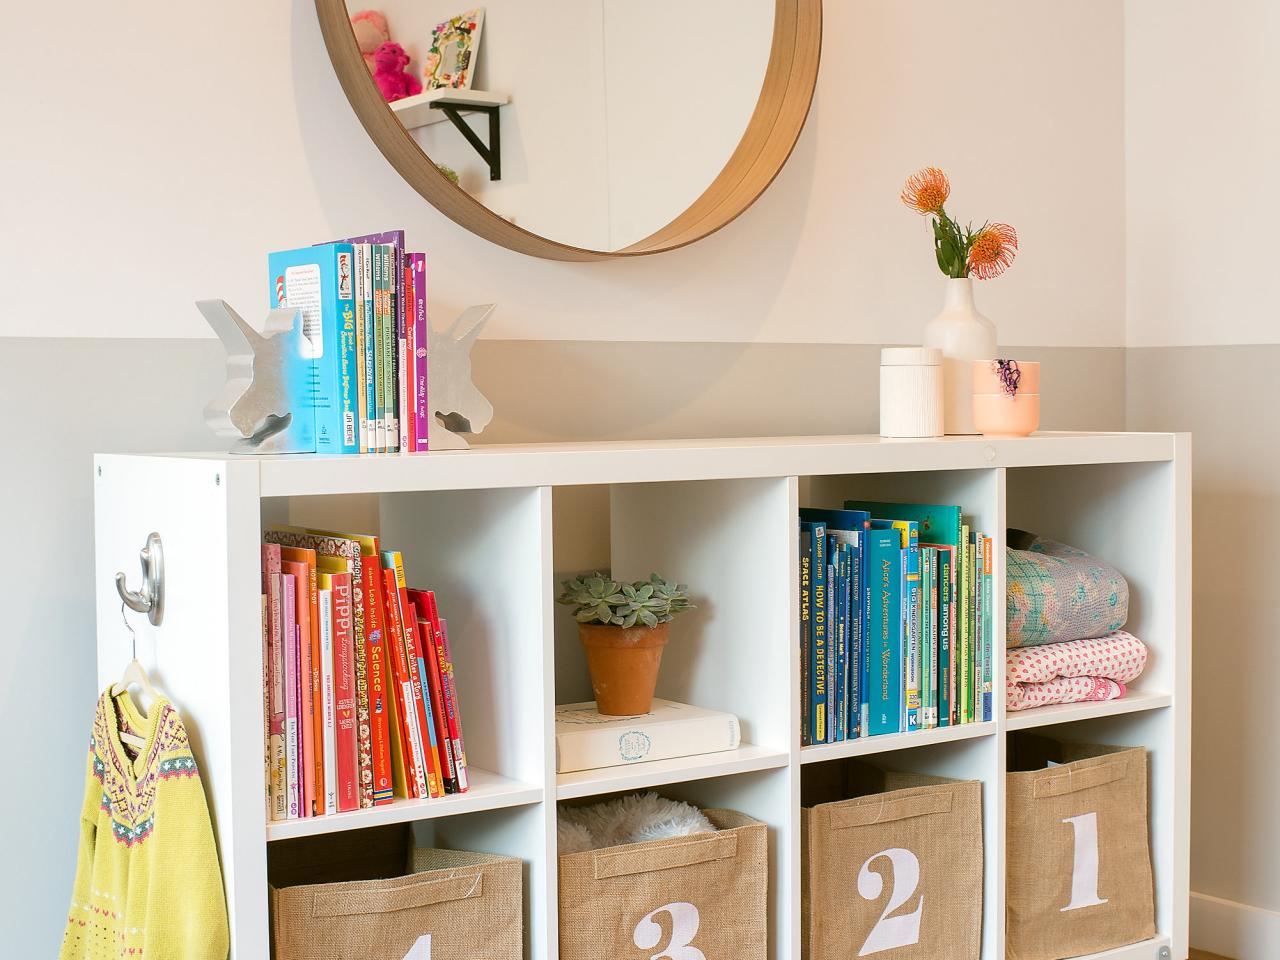 10 Decorating Ideas for Kids' Rooms